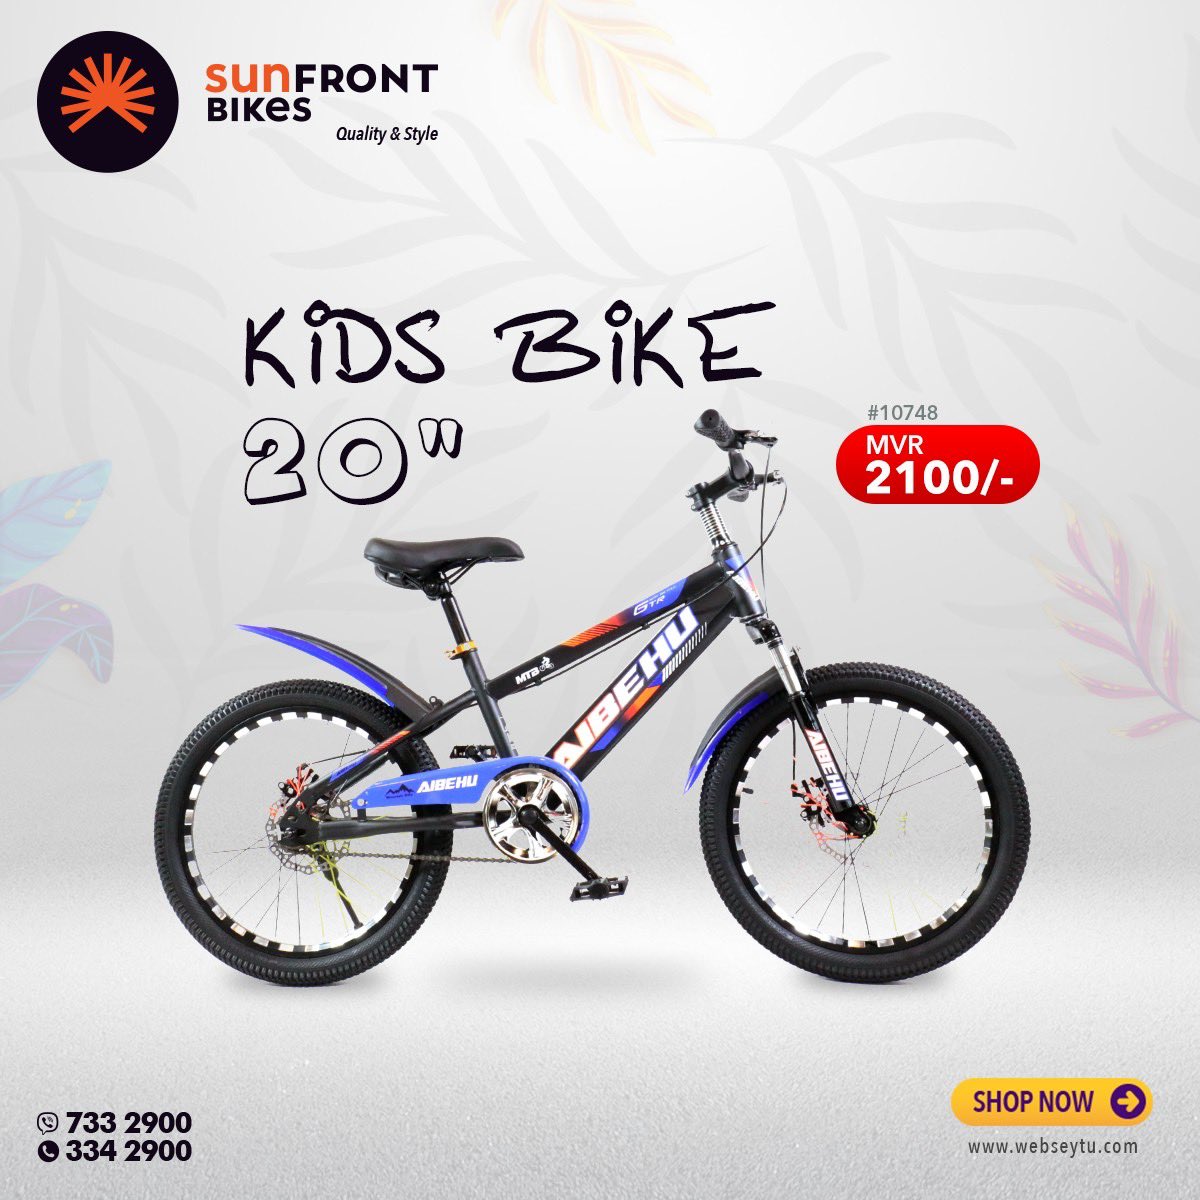 Pedal into adventure this School Holiday!

Buy Online: bit.ly/3ZQv8FQ
For more information please call/viber
Tel: 334 2900
Hotline: 733 2900

#kidsbike #scooter #kids #bikes #maldivesbikes #maldives #sfbikeshop #sunfront #qualityandstyle #skateboard #rideon #kids